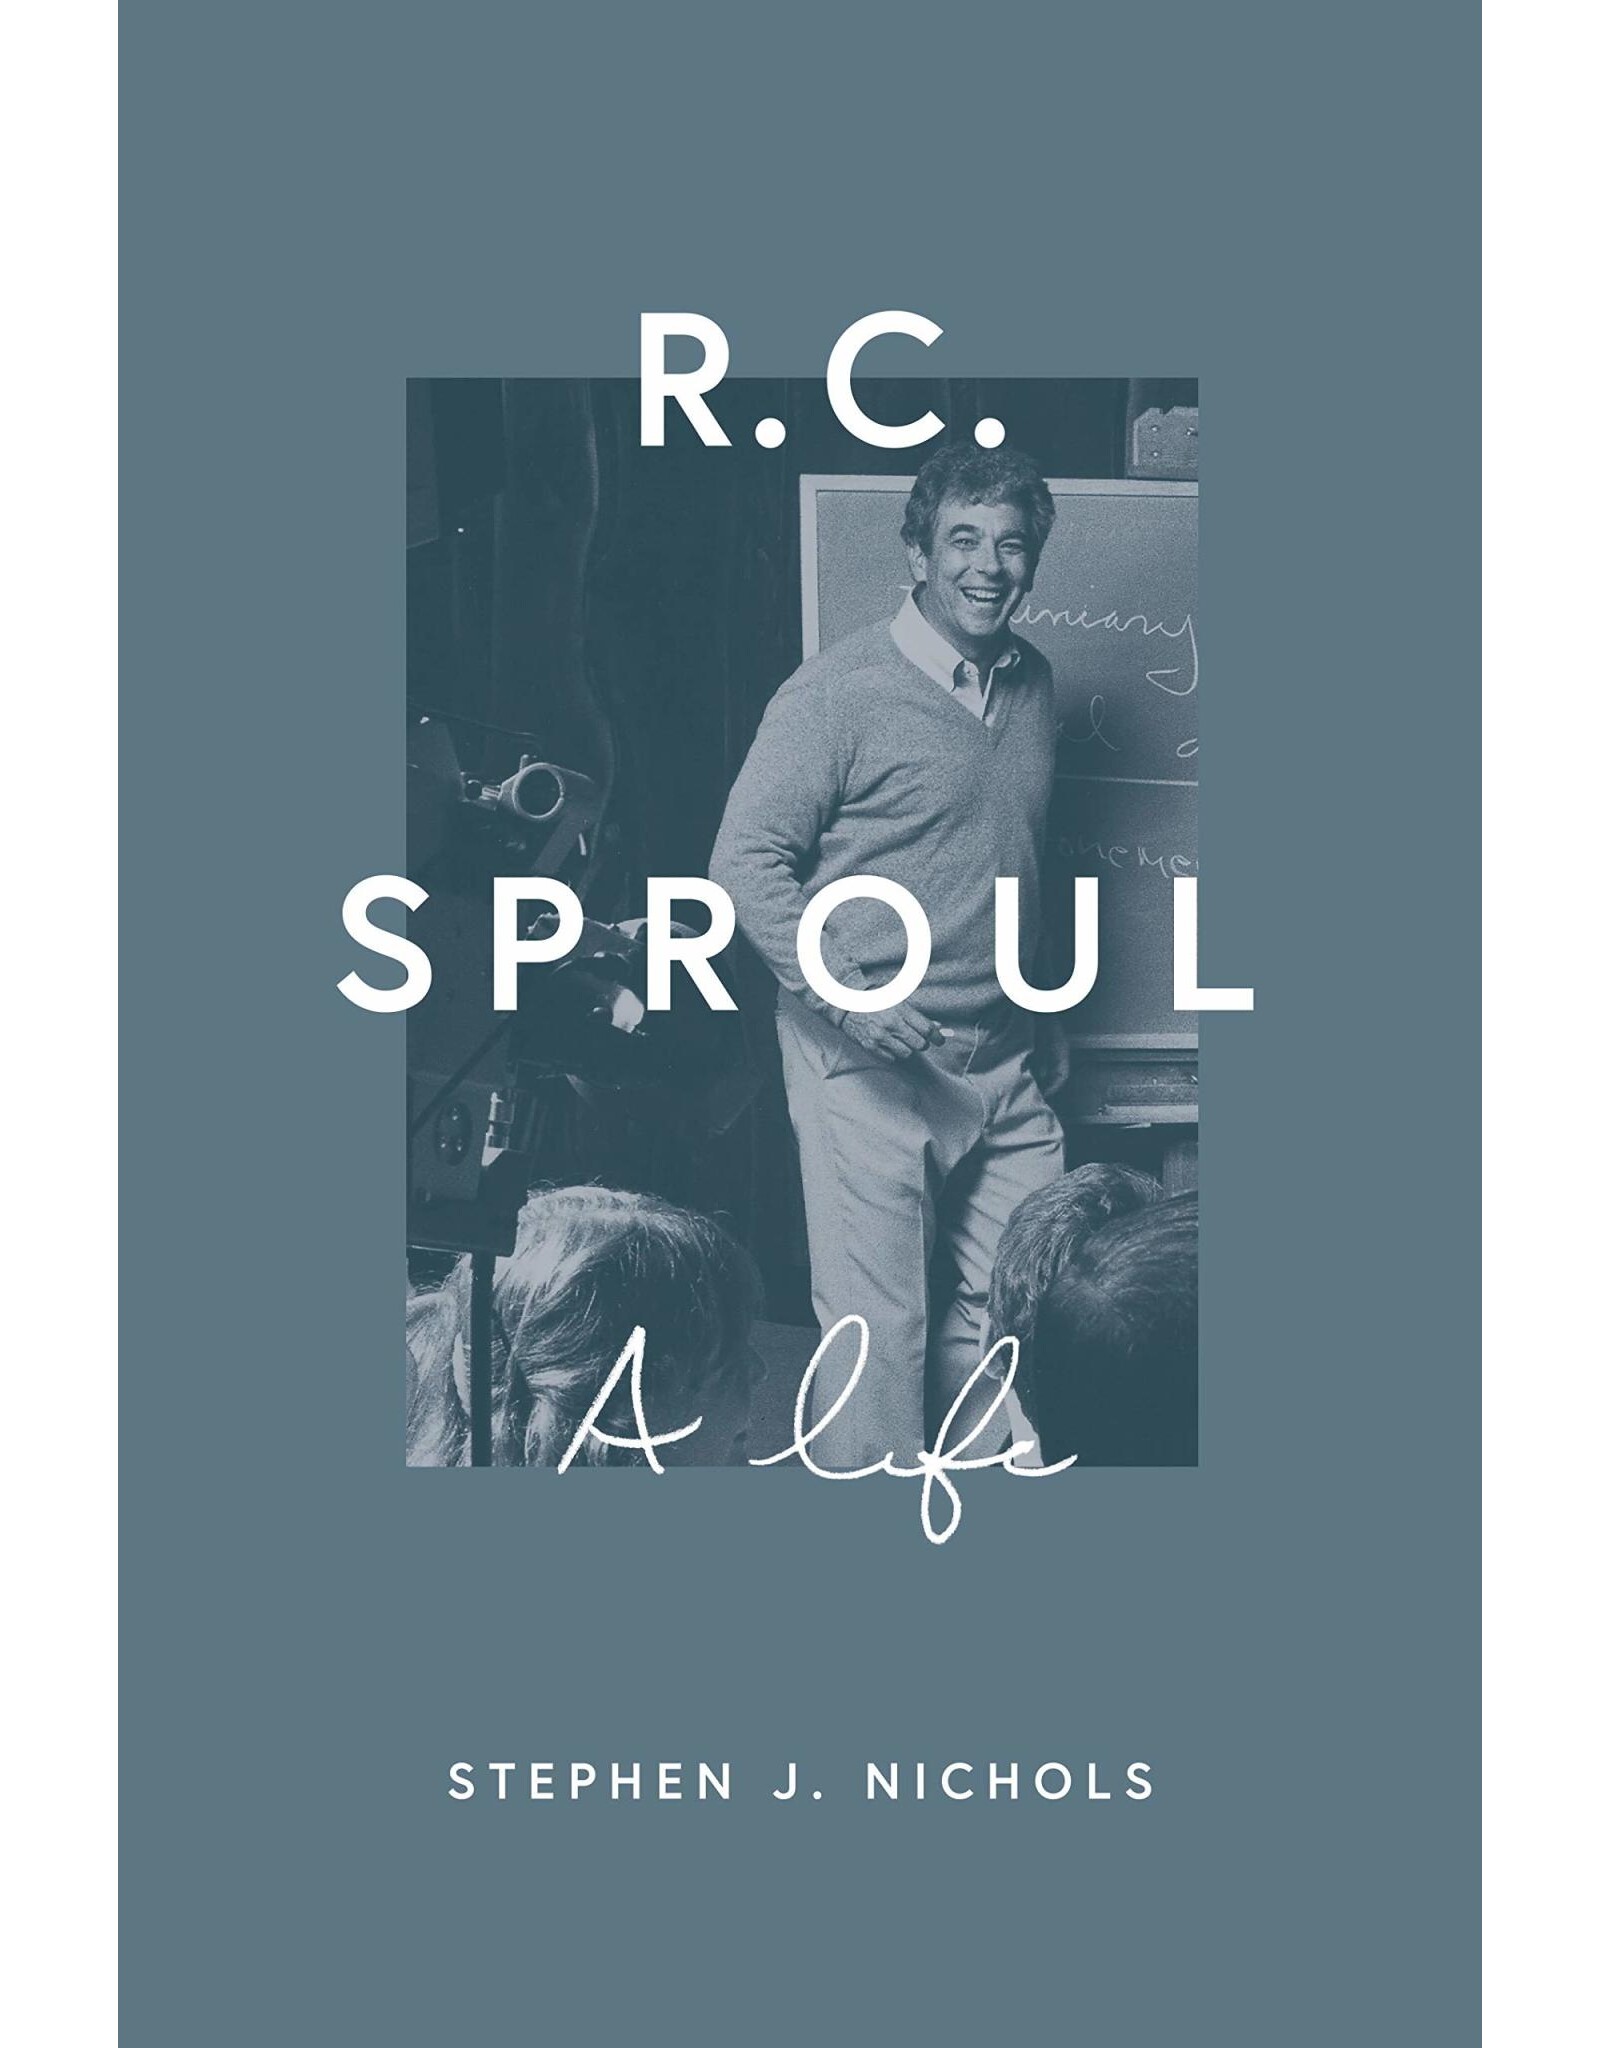 Crossway / Good News R. C. Sproul: A Life